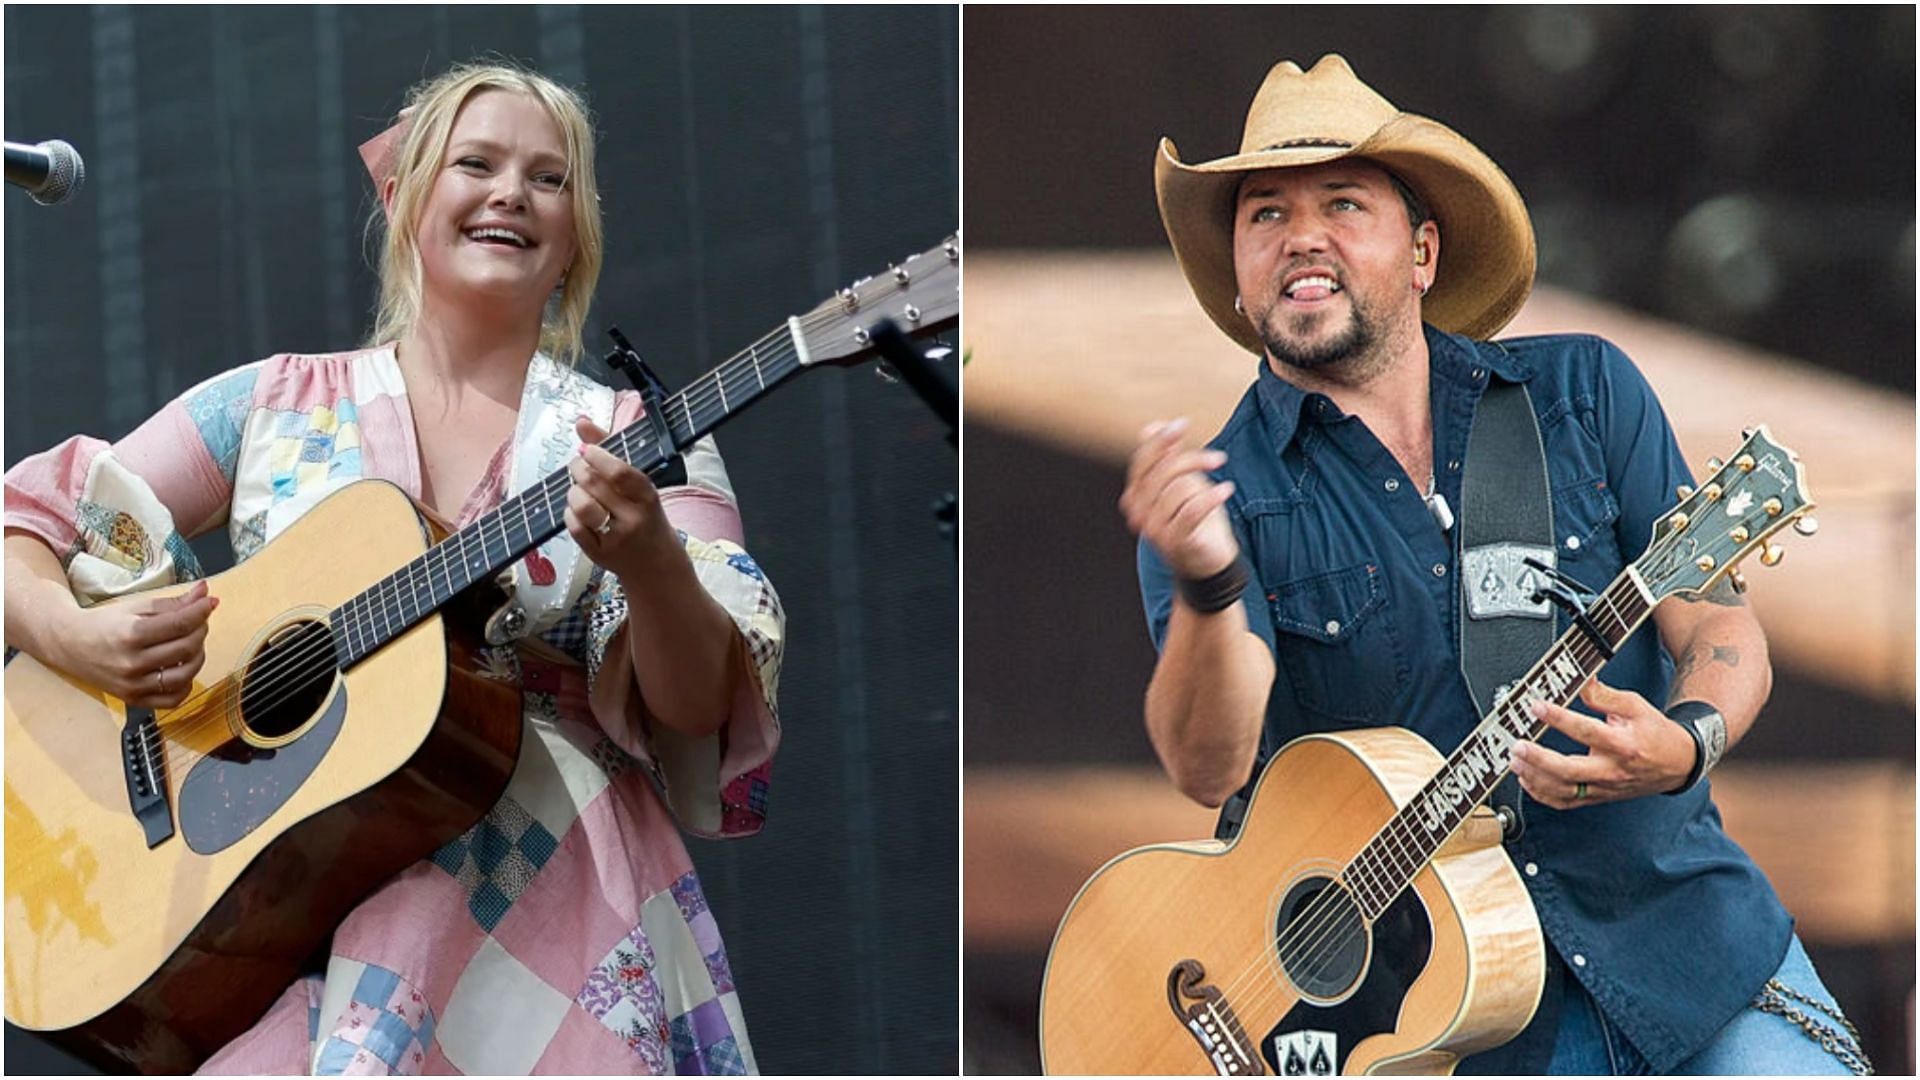 Hason Aldean and Hailey Whitters are among the performers at the TidalWave Music festival. (Images via Getty)